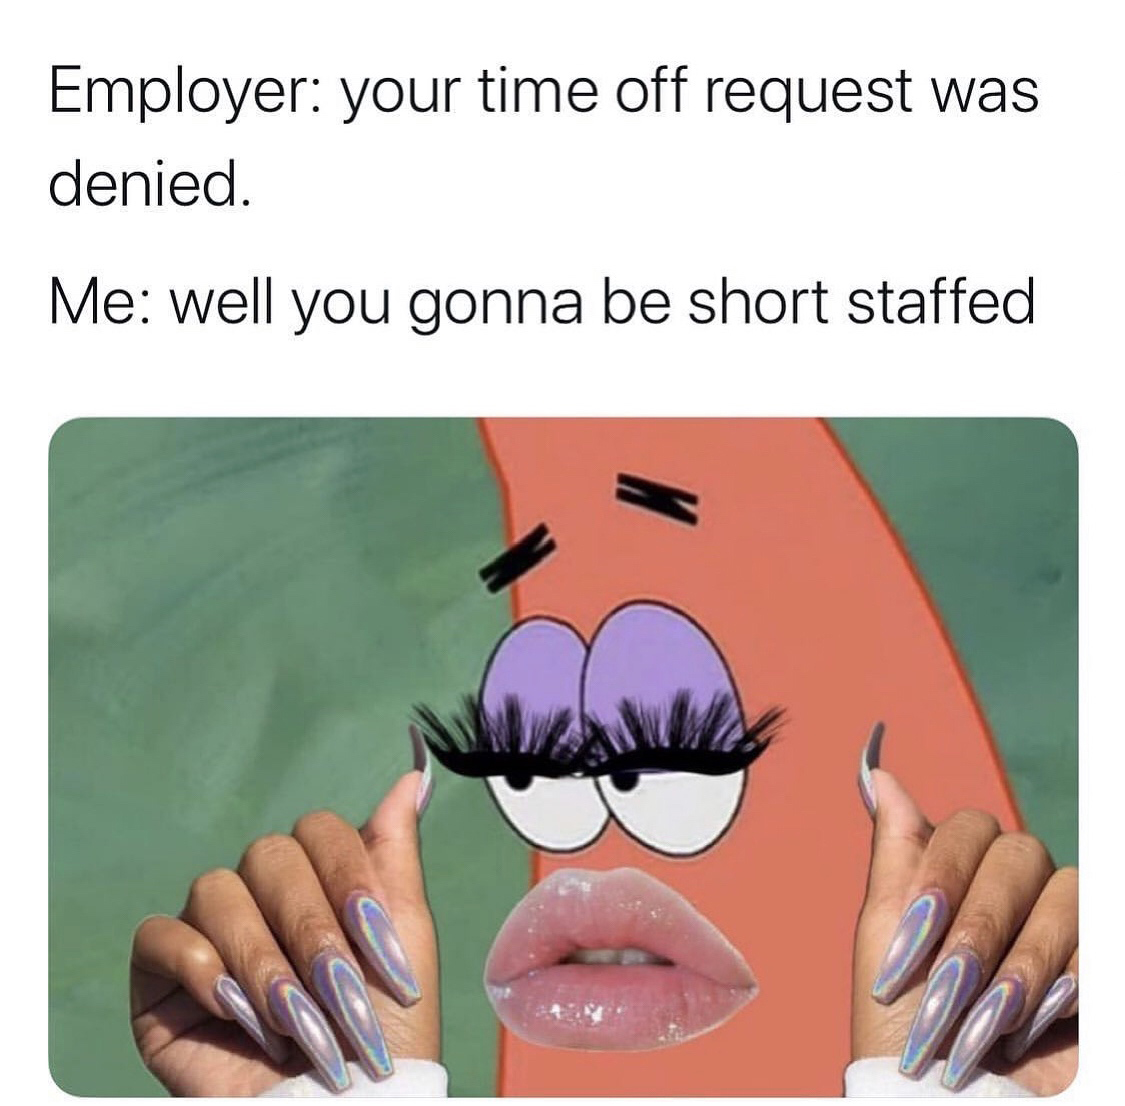 mouth - Employer your time off request was denied. Me well you gonna be short staffed